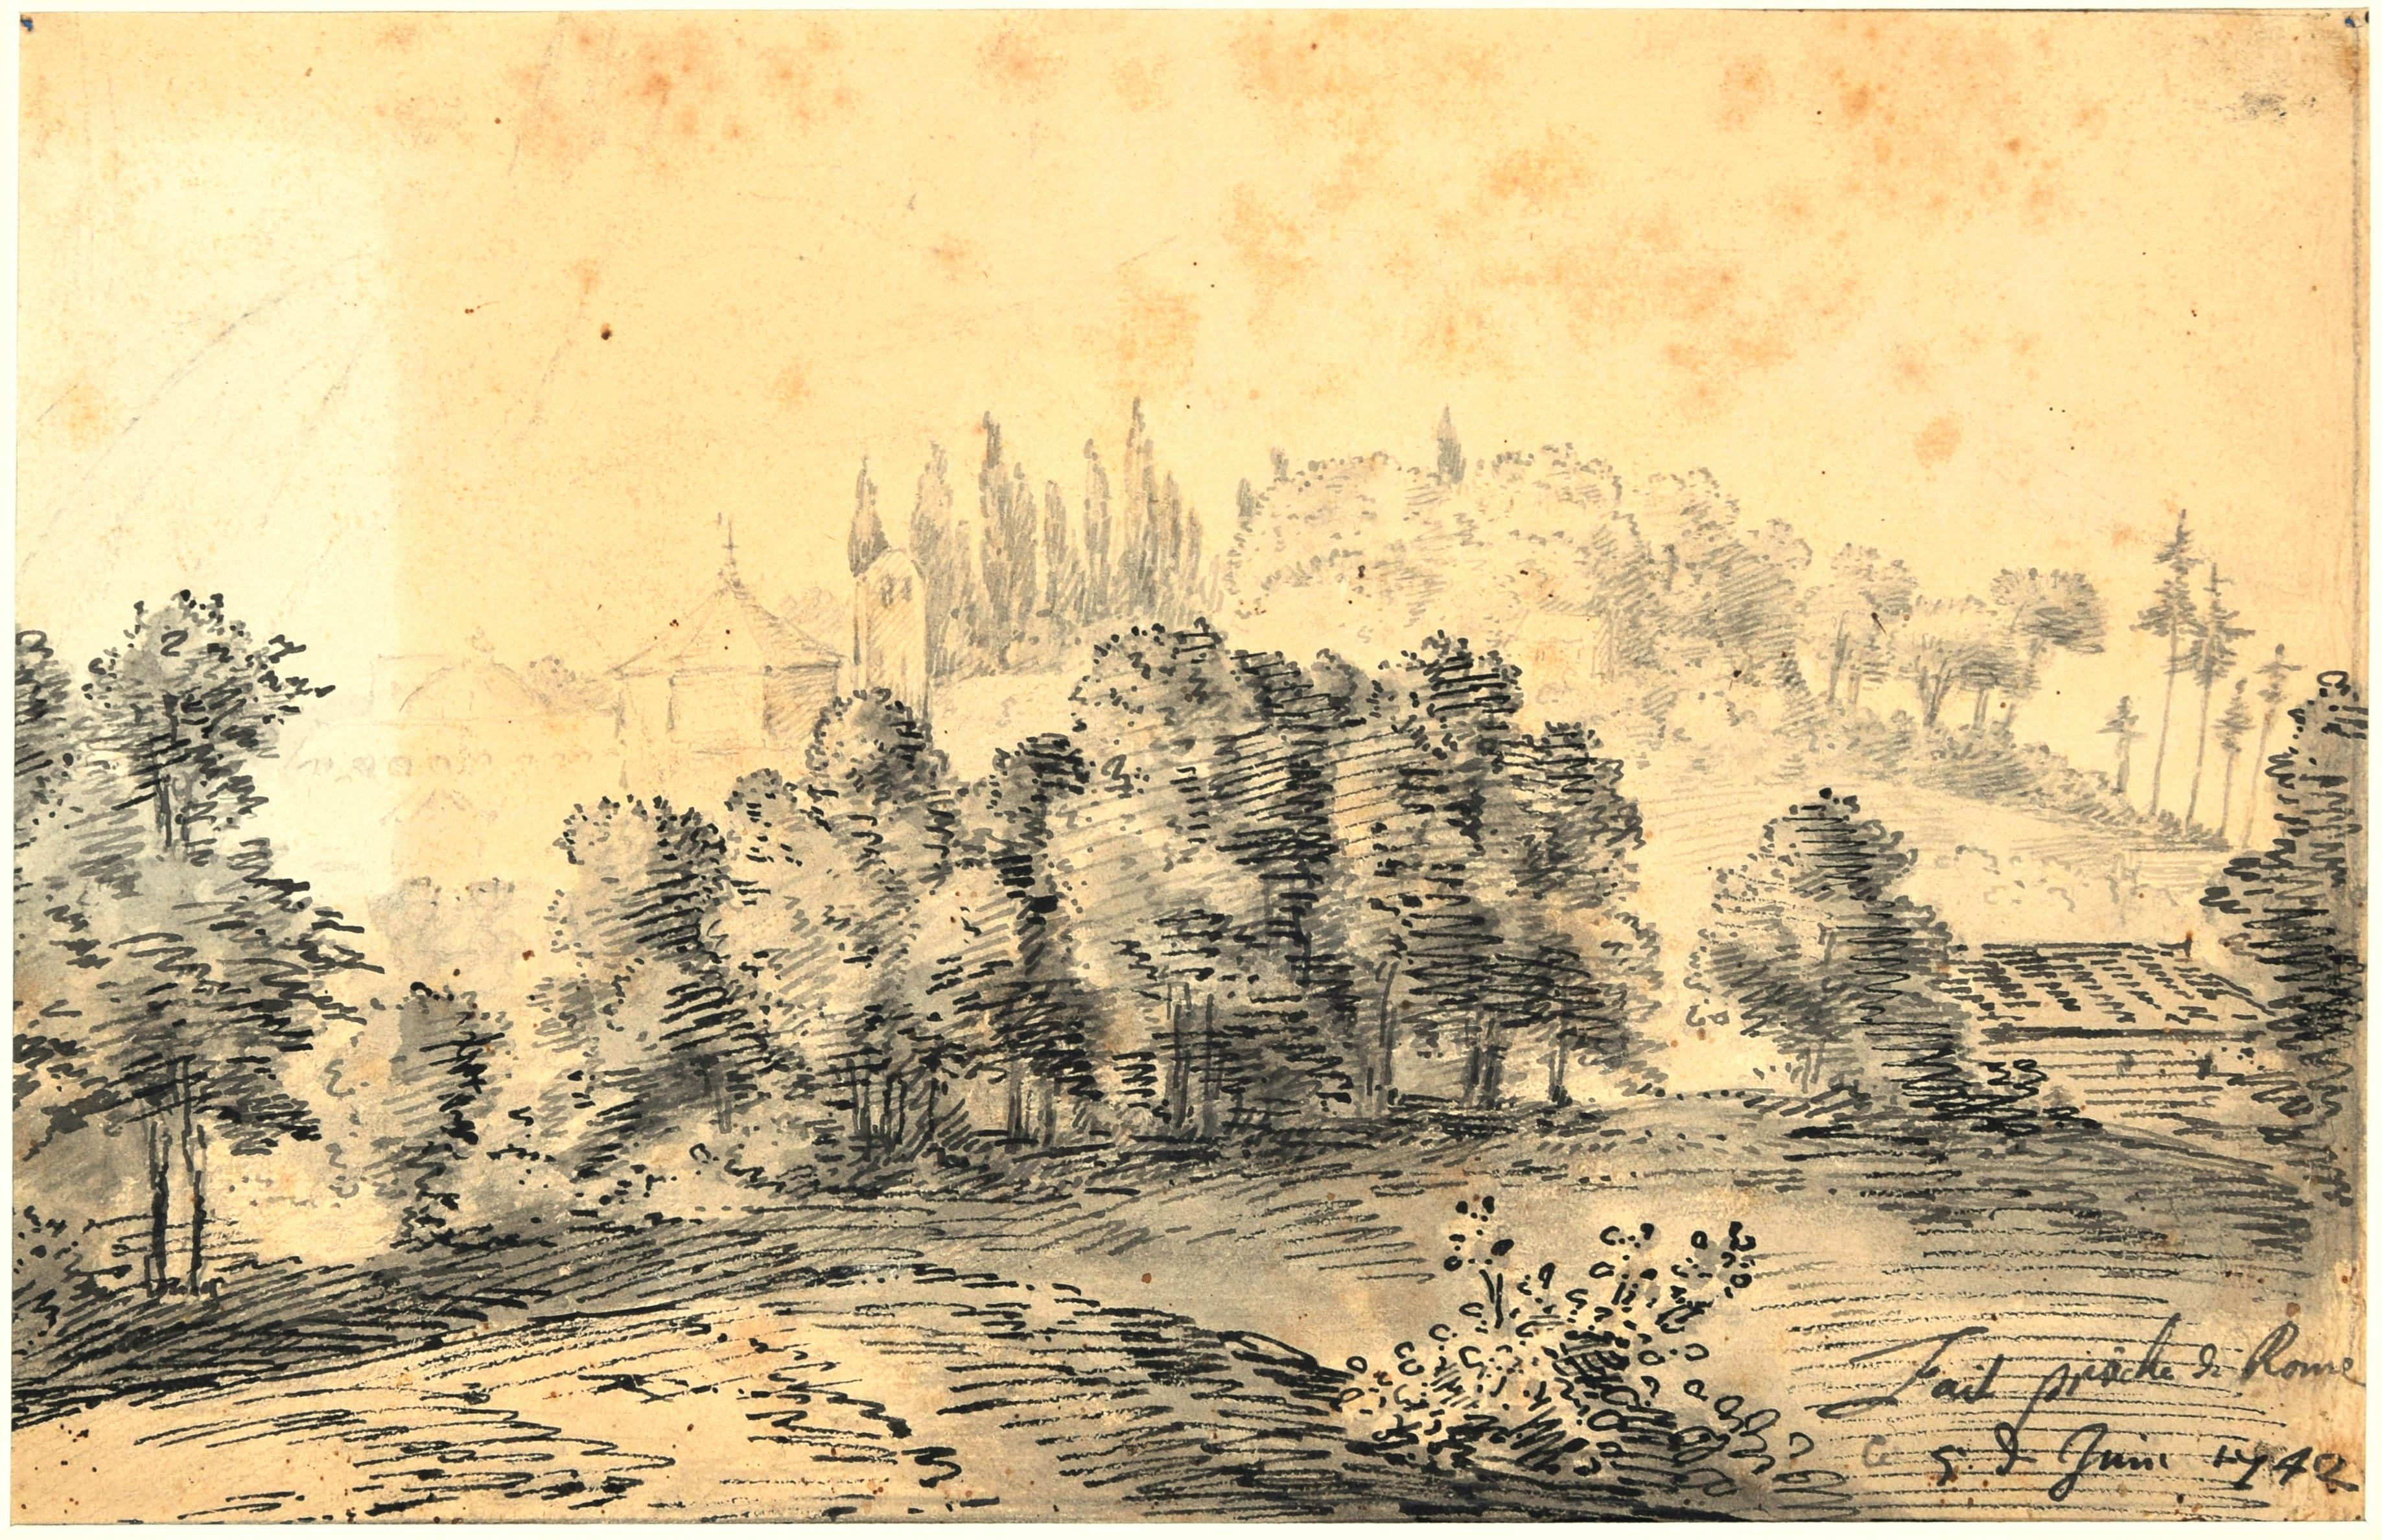 Rome, The Countryside- China Ink Drawing by Jan Pieter Verdussen - 1742